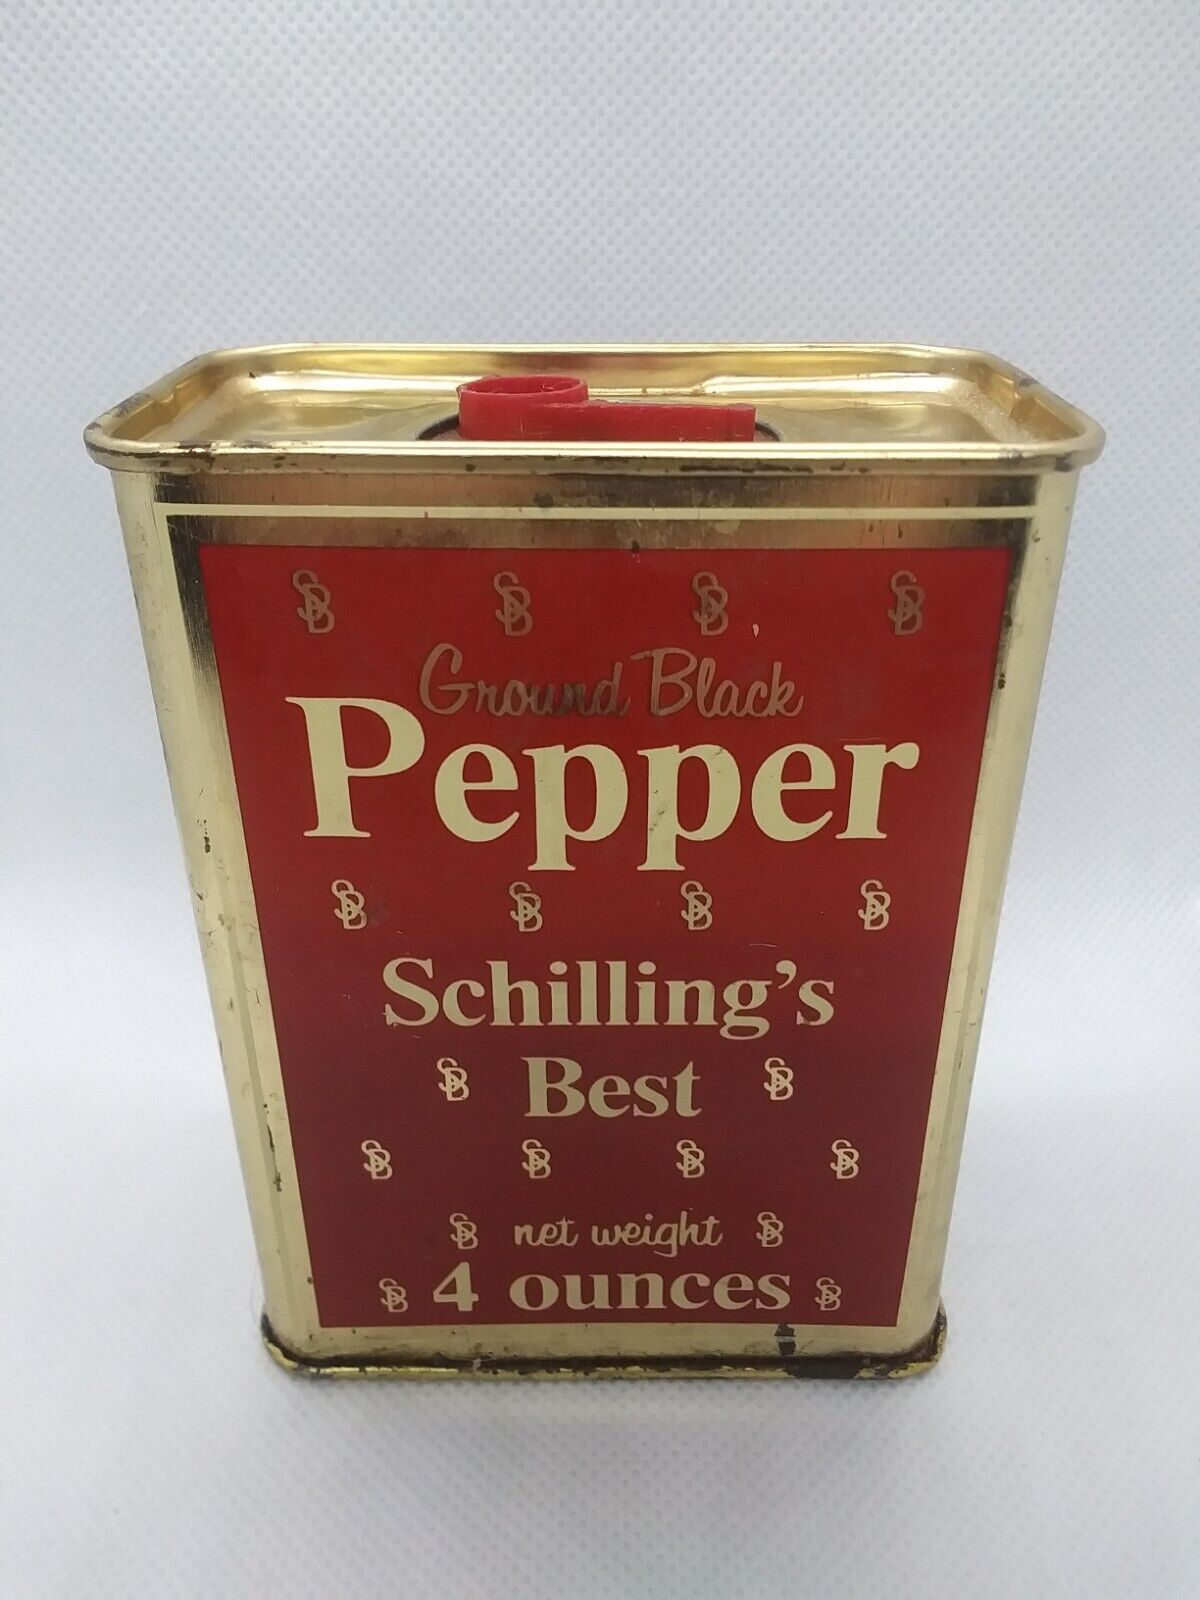 Vintage 1976 McCormick & CO Ground Black Pepper Schilling's Best 4 Ounce Tin